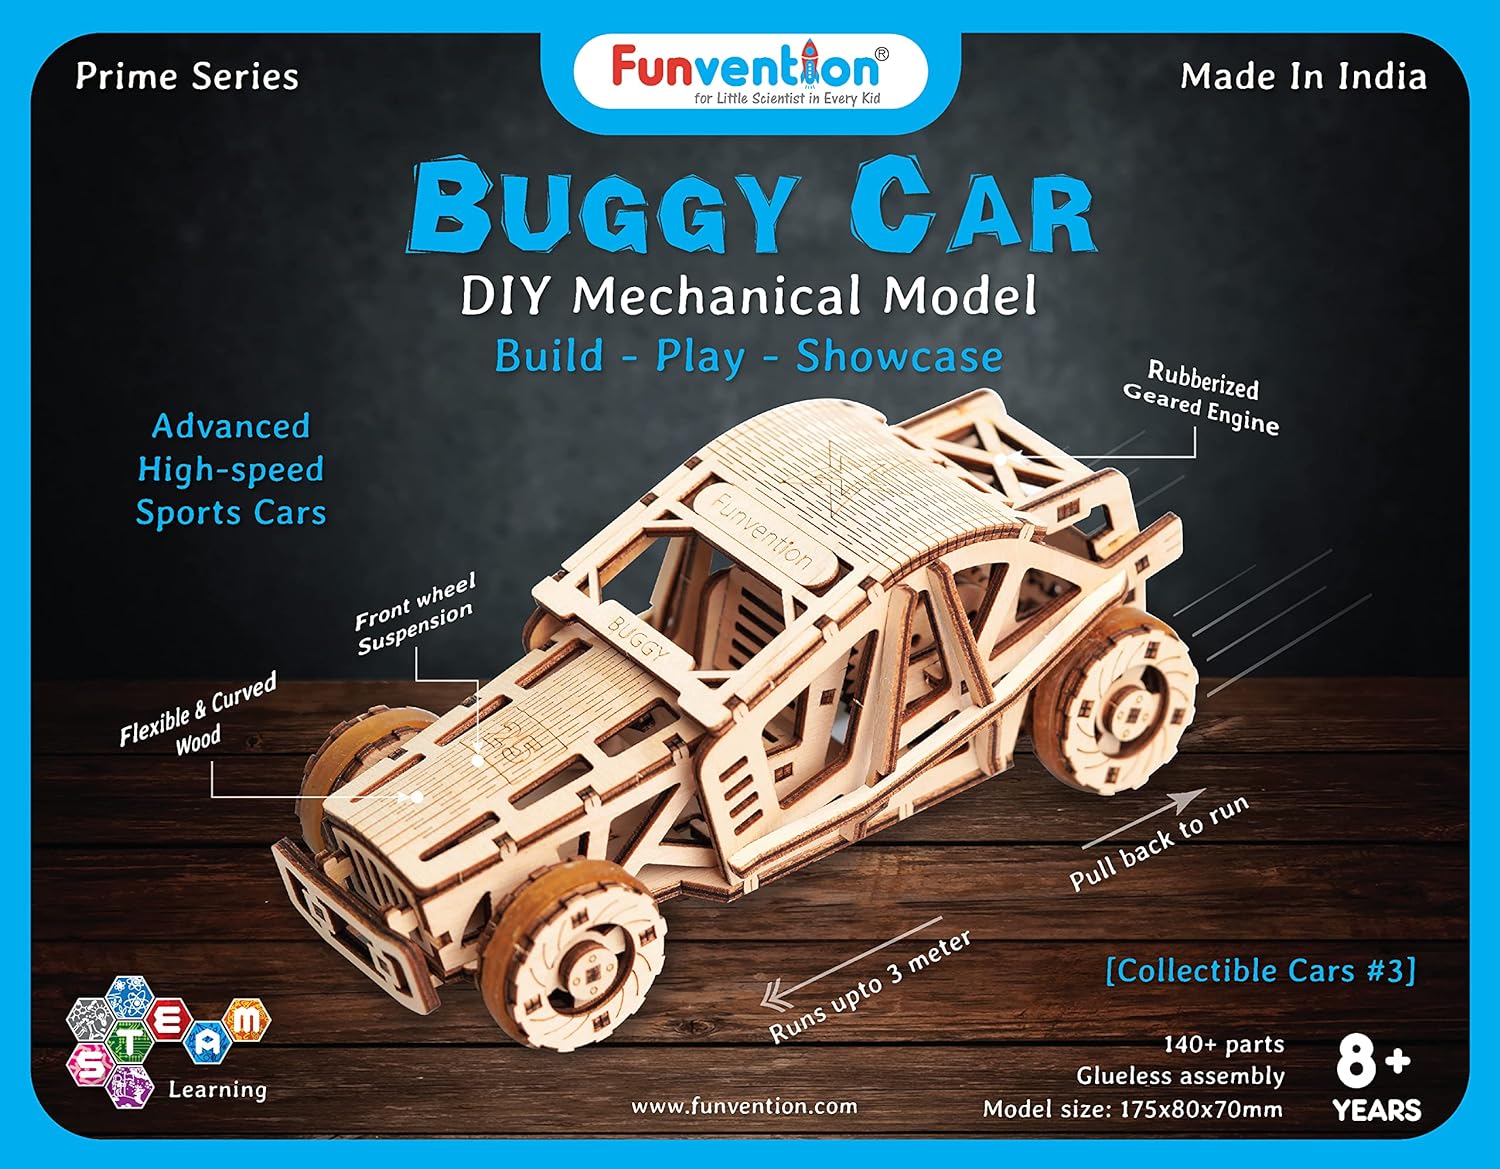 FUNVENTION Buggy Car - DIY Functional Mechanical Model 3D Puzzle STEM Lerning Kit Collectible Cars Building Kit with Working Wheels & Shocks